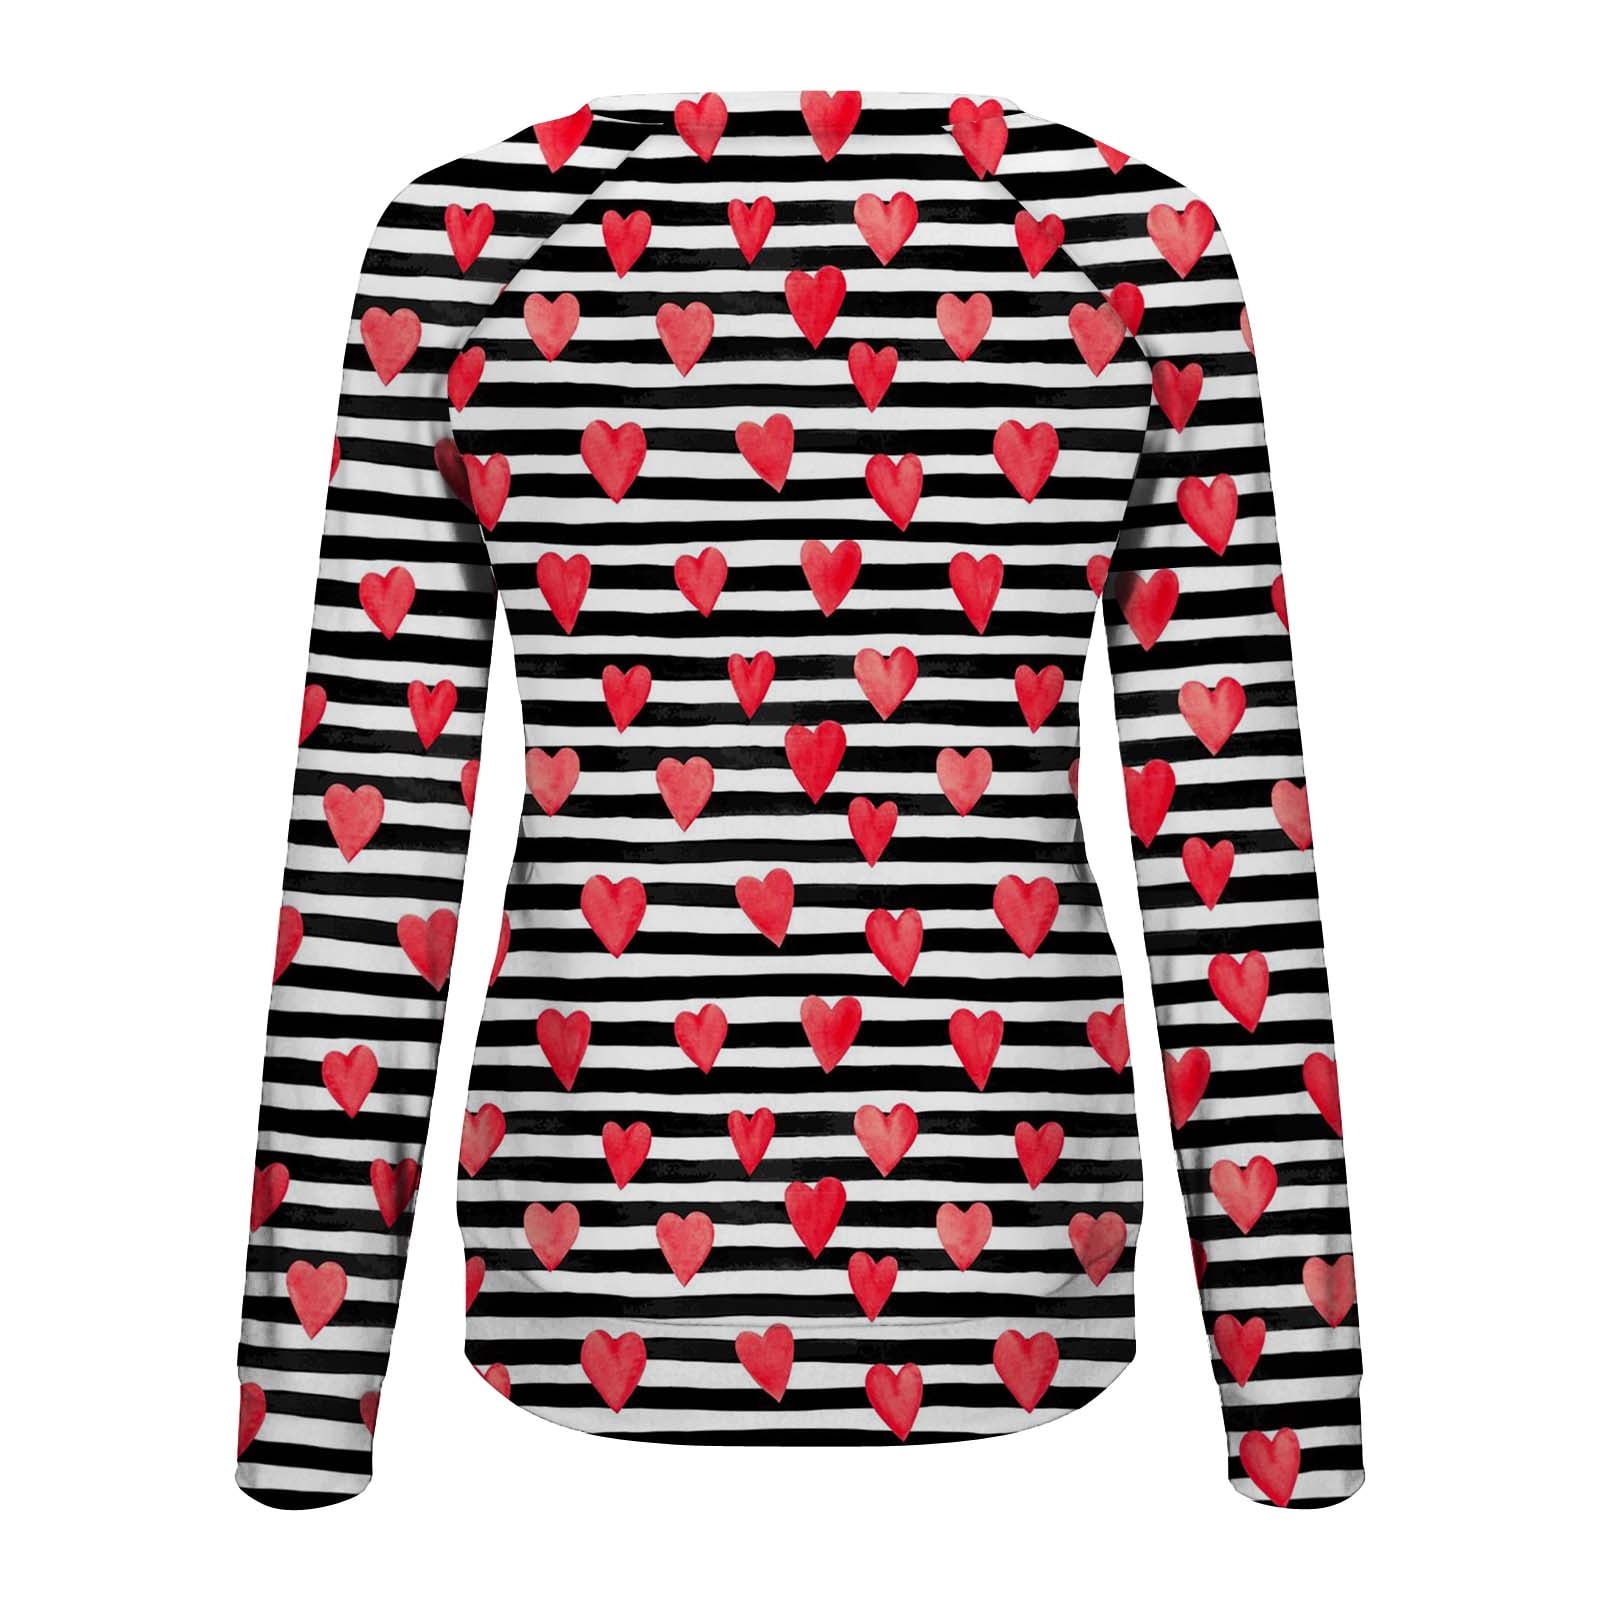 RQYYD Women Sleeve Graphic Long Pullover Love Stripe XL Sweatshirt Day Casual Happy Tops Loose Red Valentine\'s Shirts Heart Crewneck